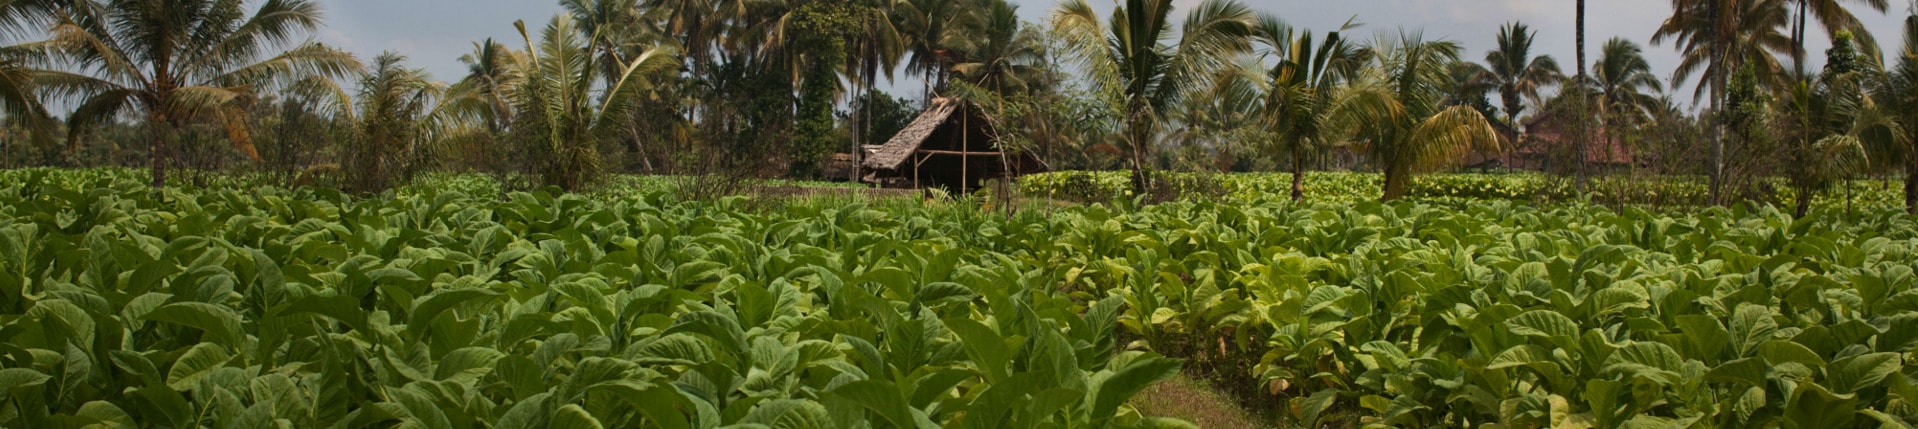 sustainability_good_agricultural_practices_1920x429